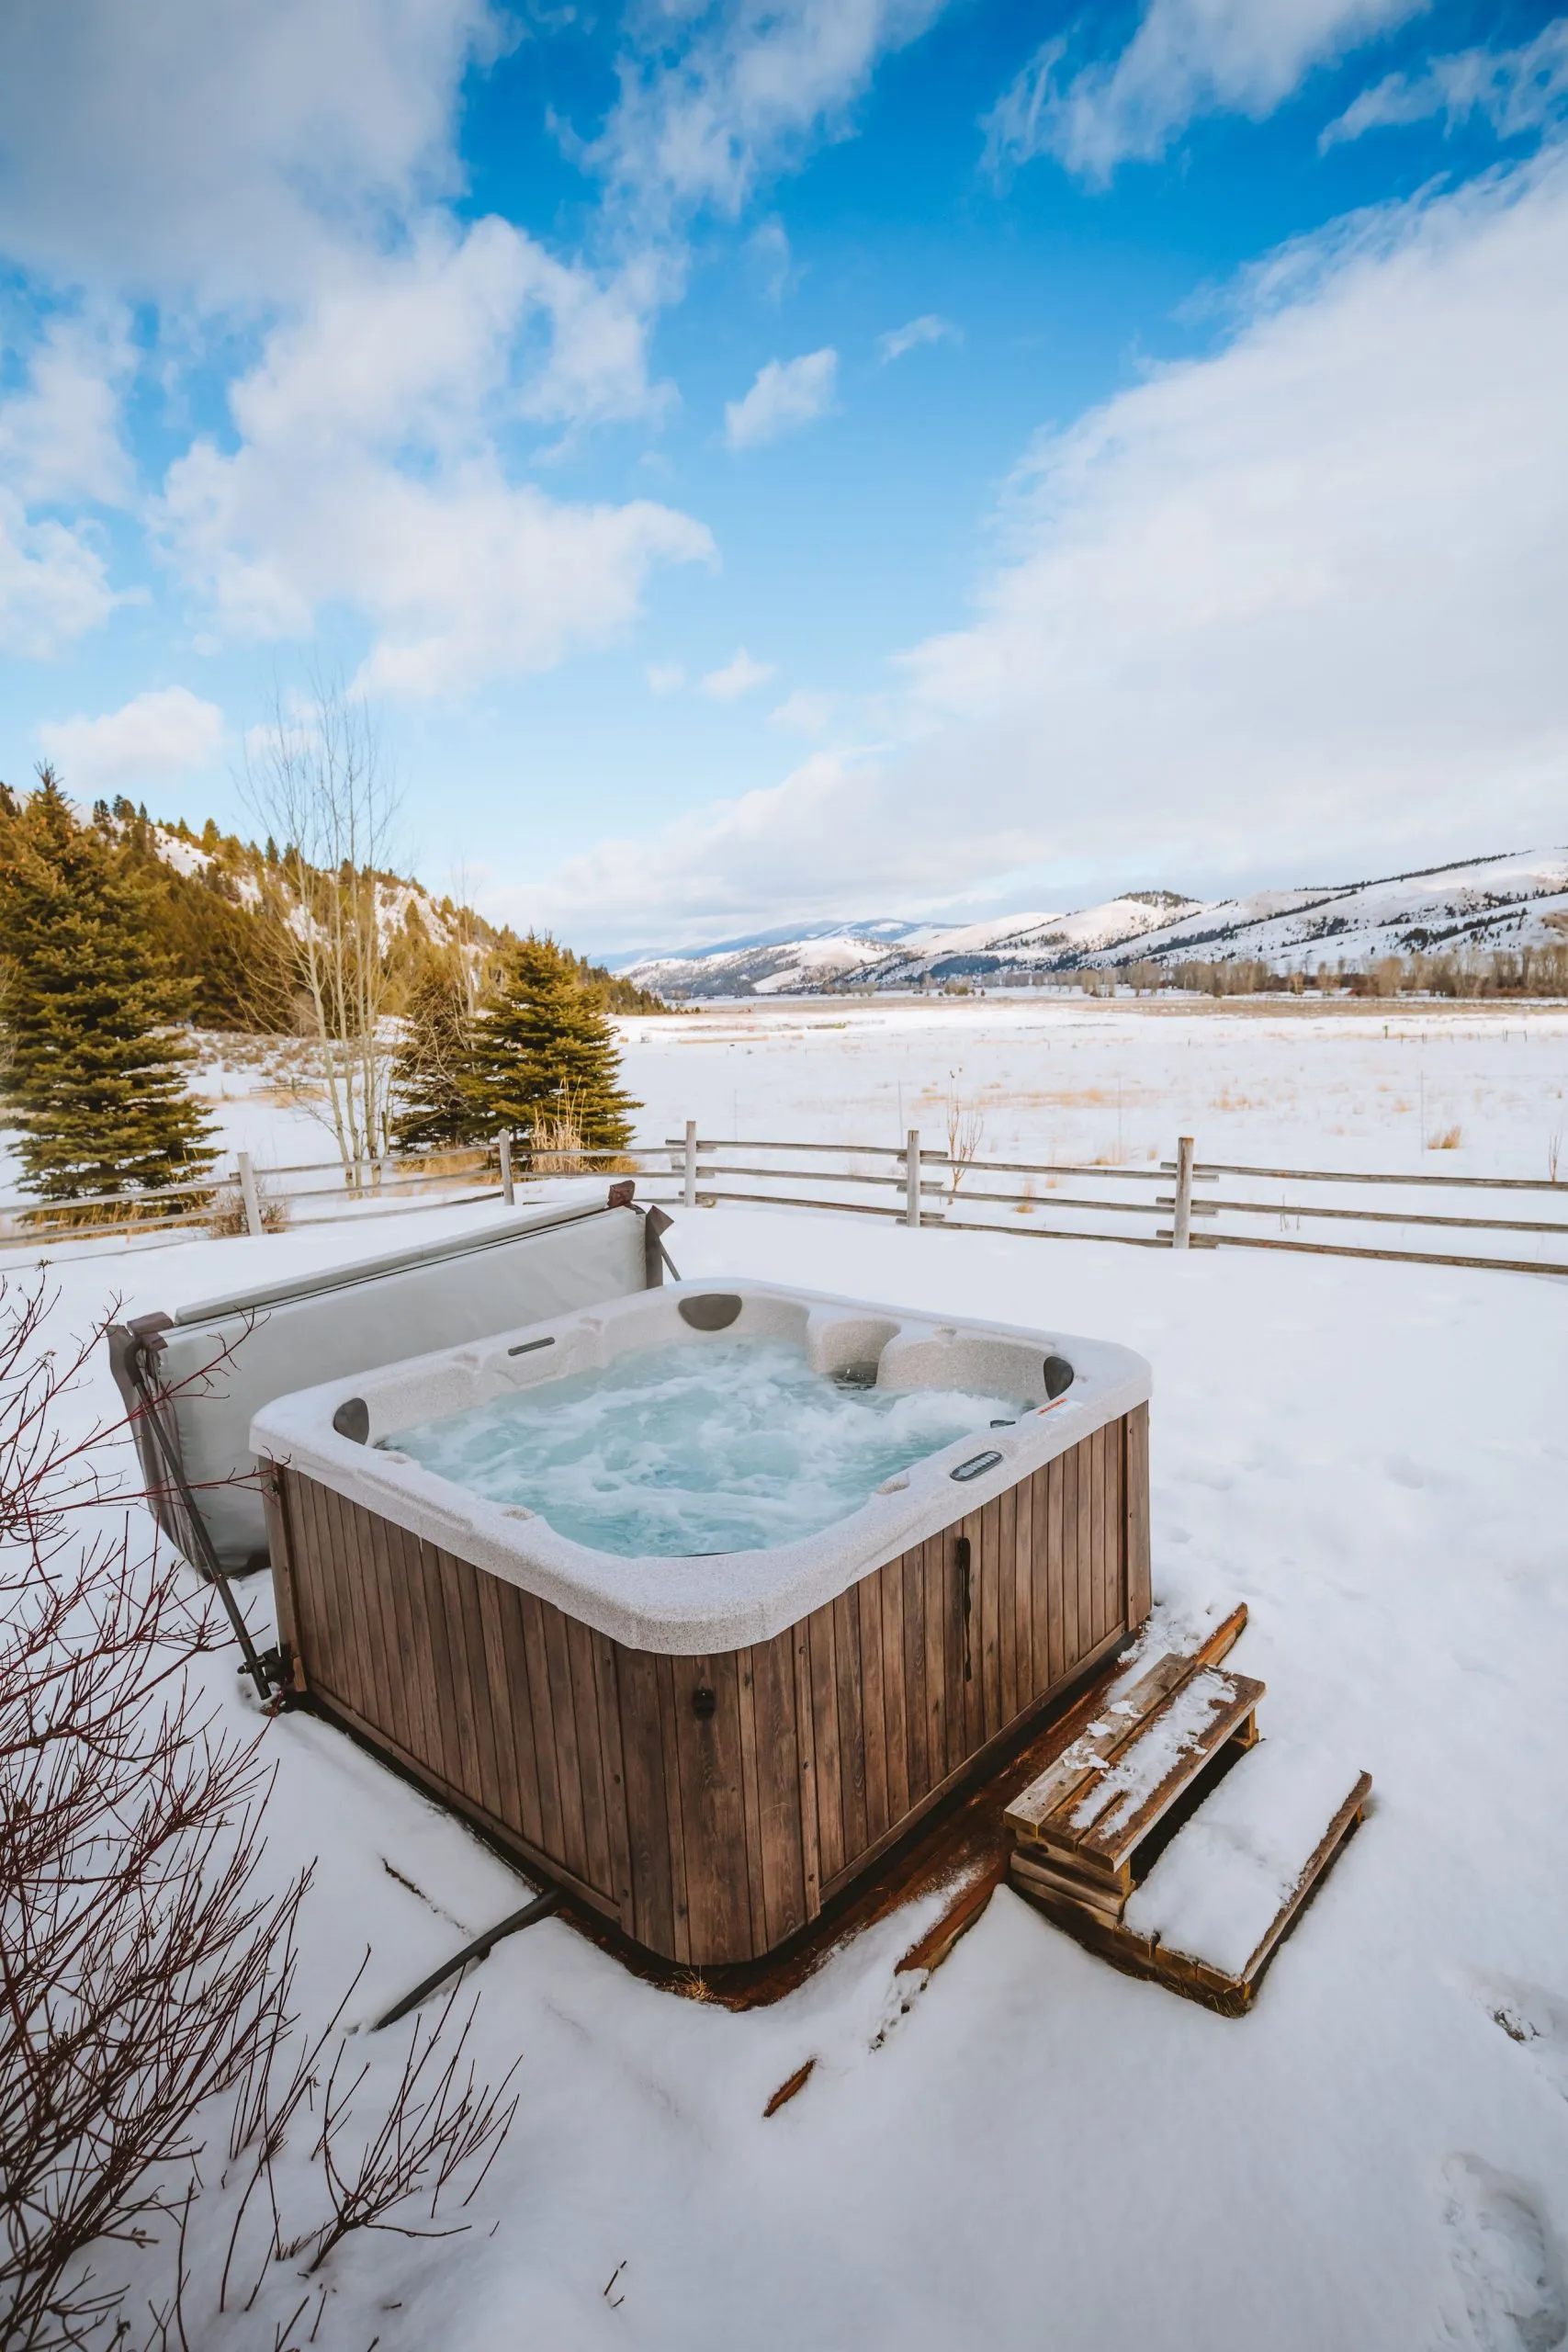 A hot tub outside on a wooden platform with snow covering the ground, blue sky and clouds in the distance